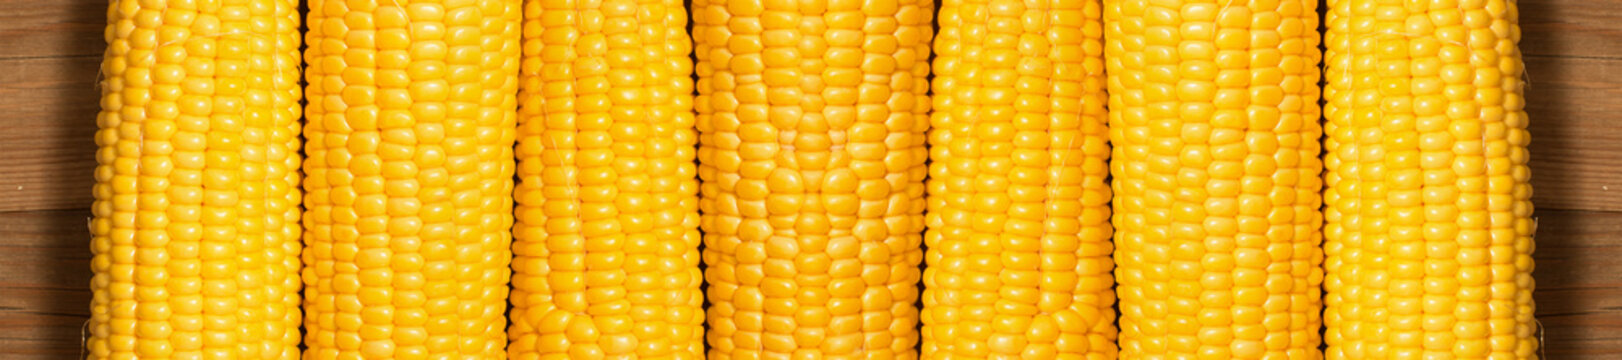 corn on the wooden background